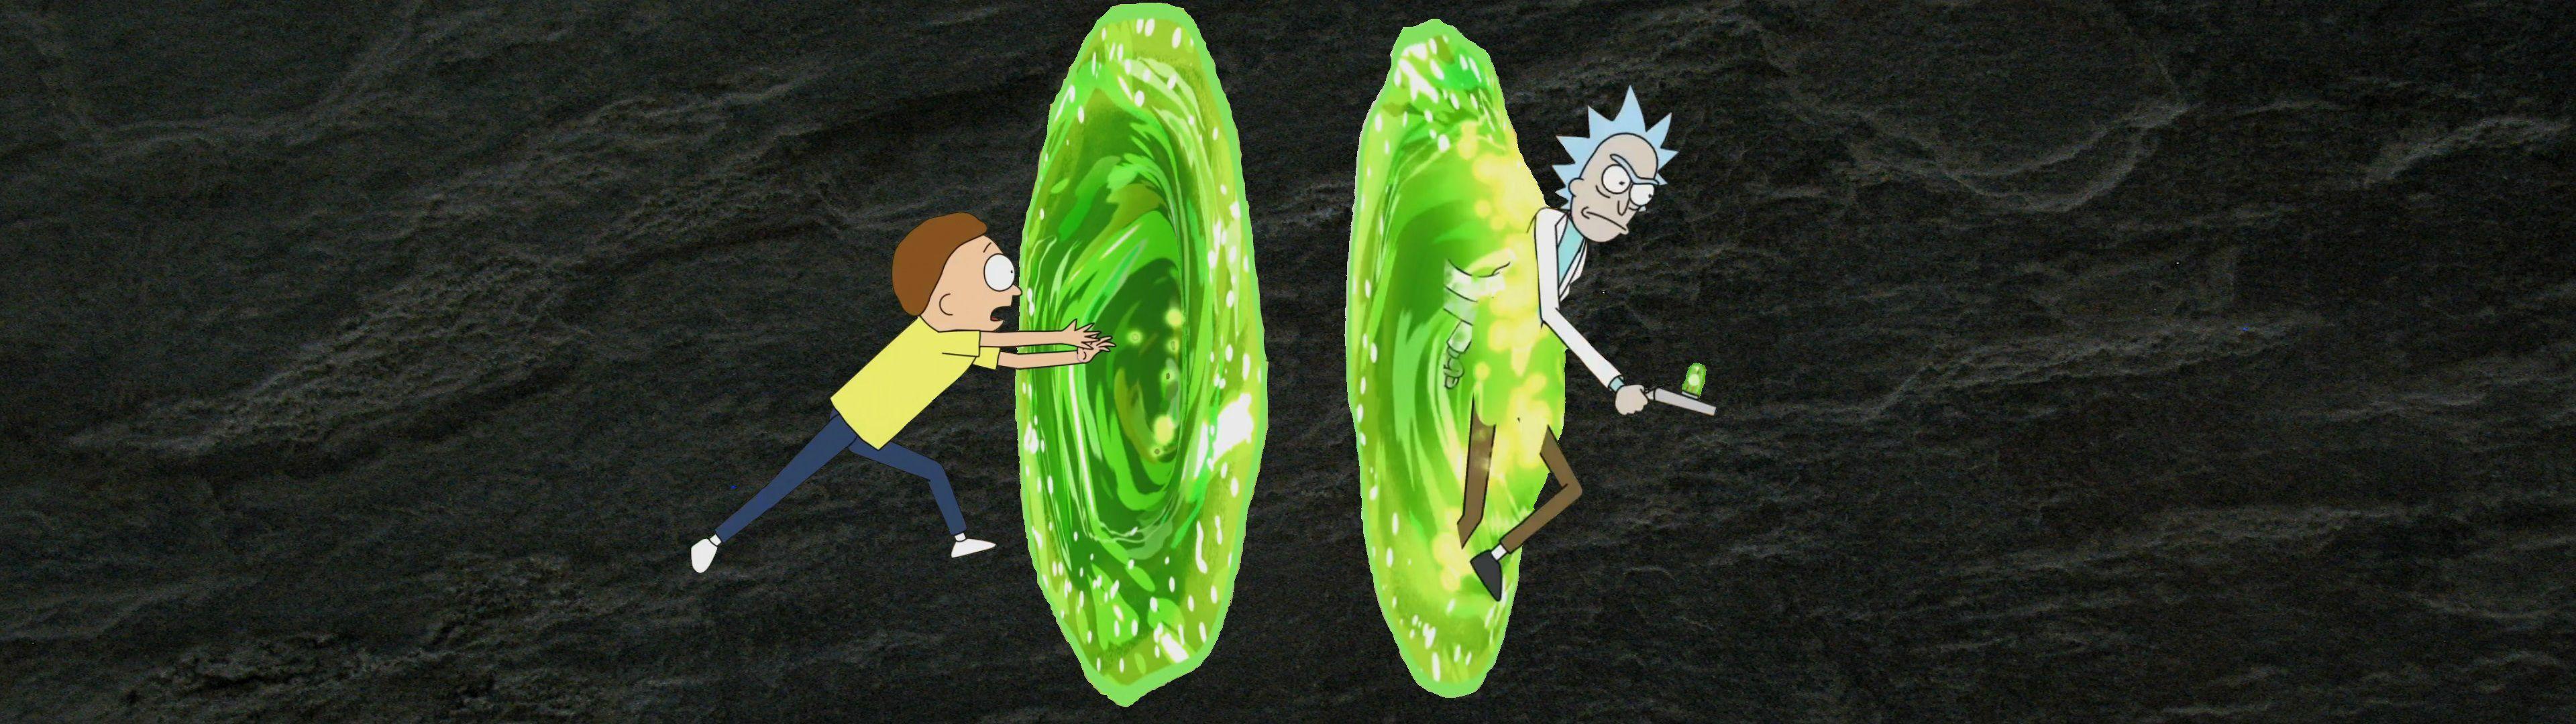 Rick And Morty Dual Screen Wallpapers Top Free Rick And